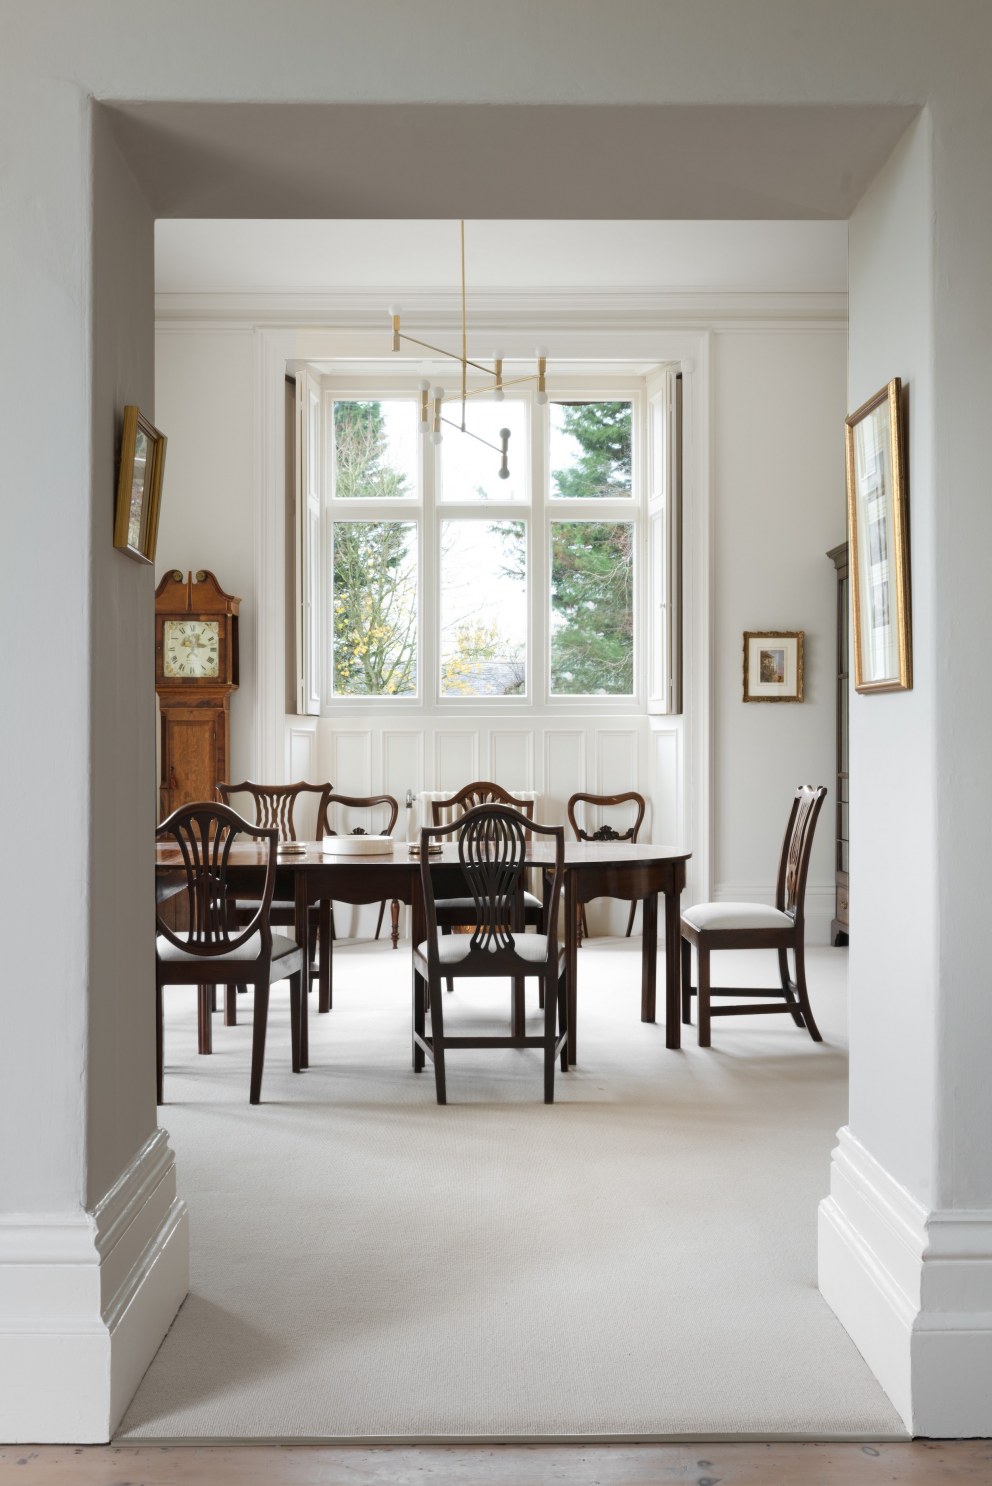 Boutique Holiday Let in a Grade II listed Hall | Dining Room in grade 2 listed hall | Interior Designers